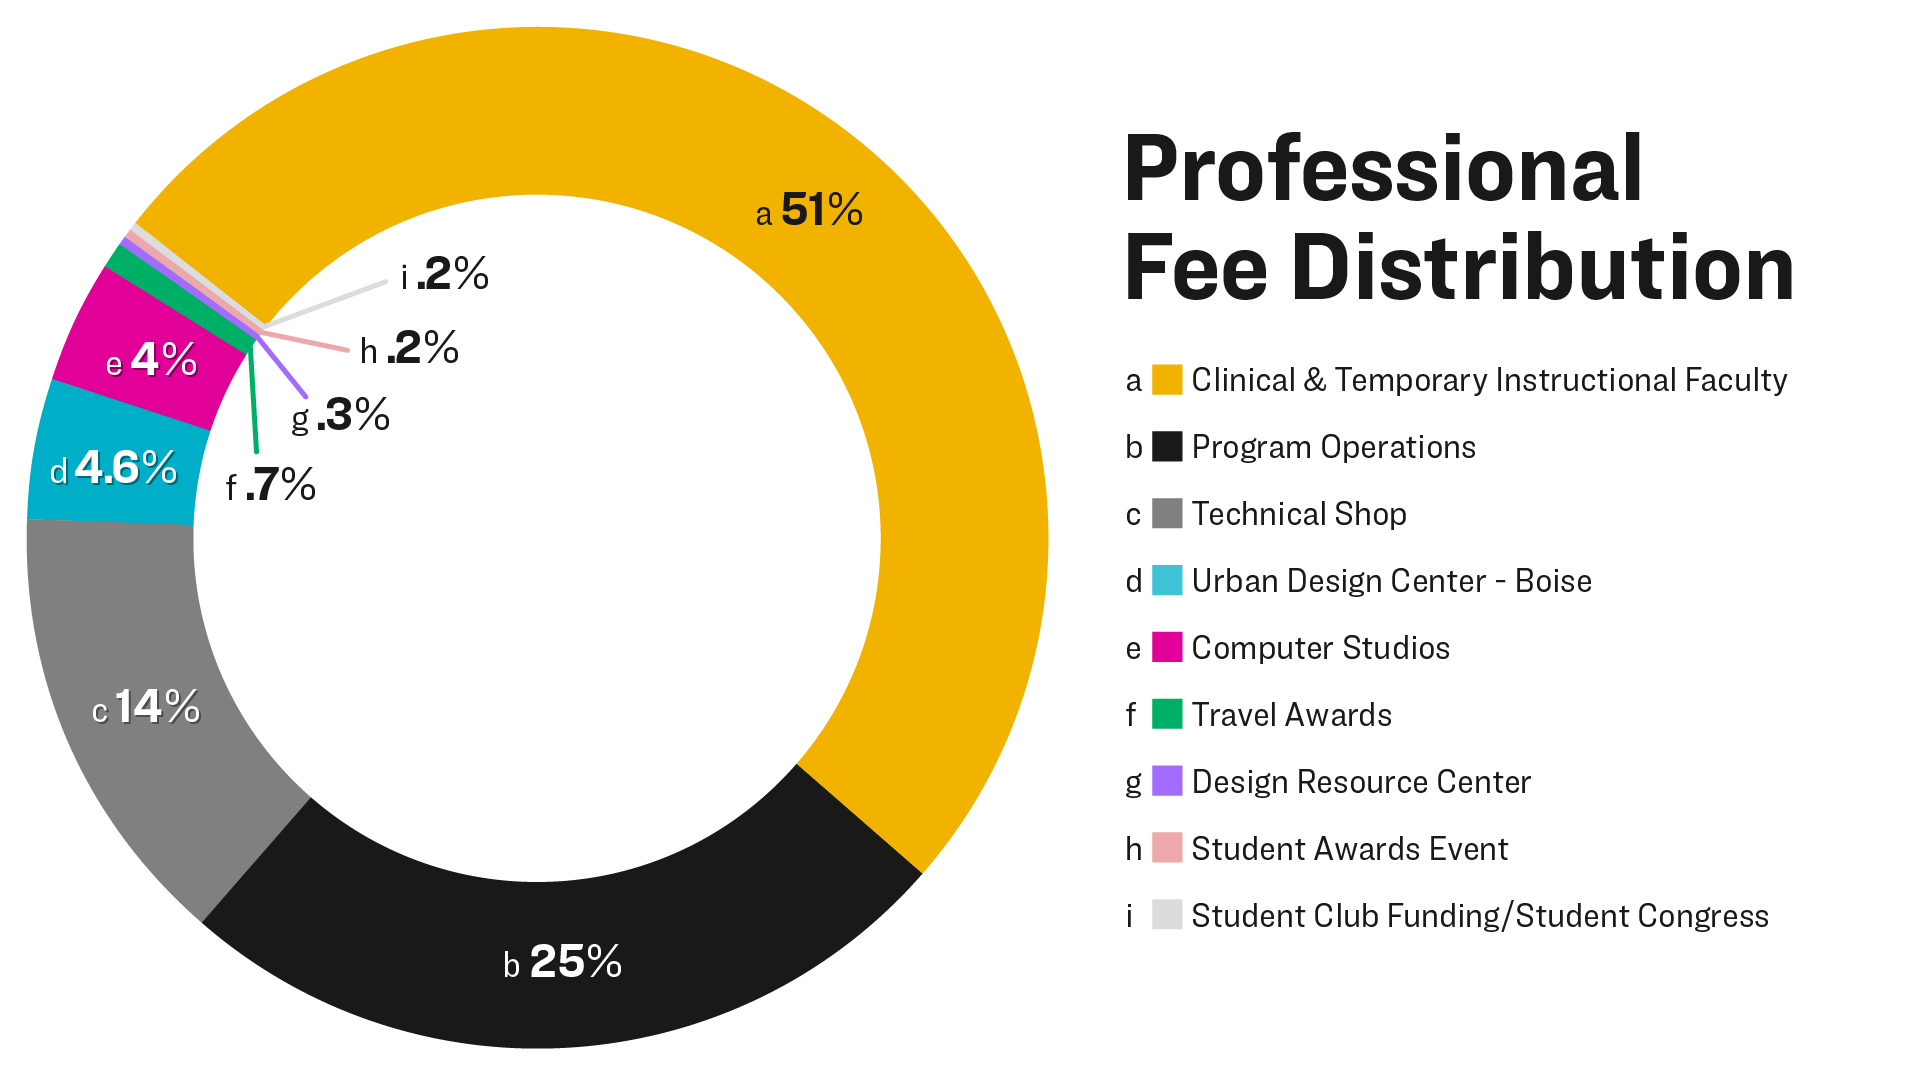 Pie chart showing how the professional fee is distributed across budget items. 